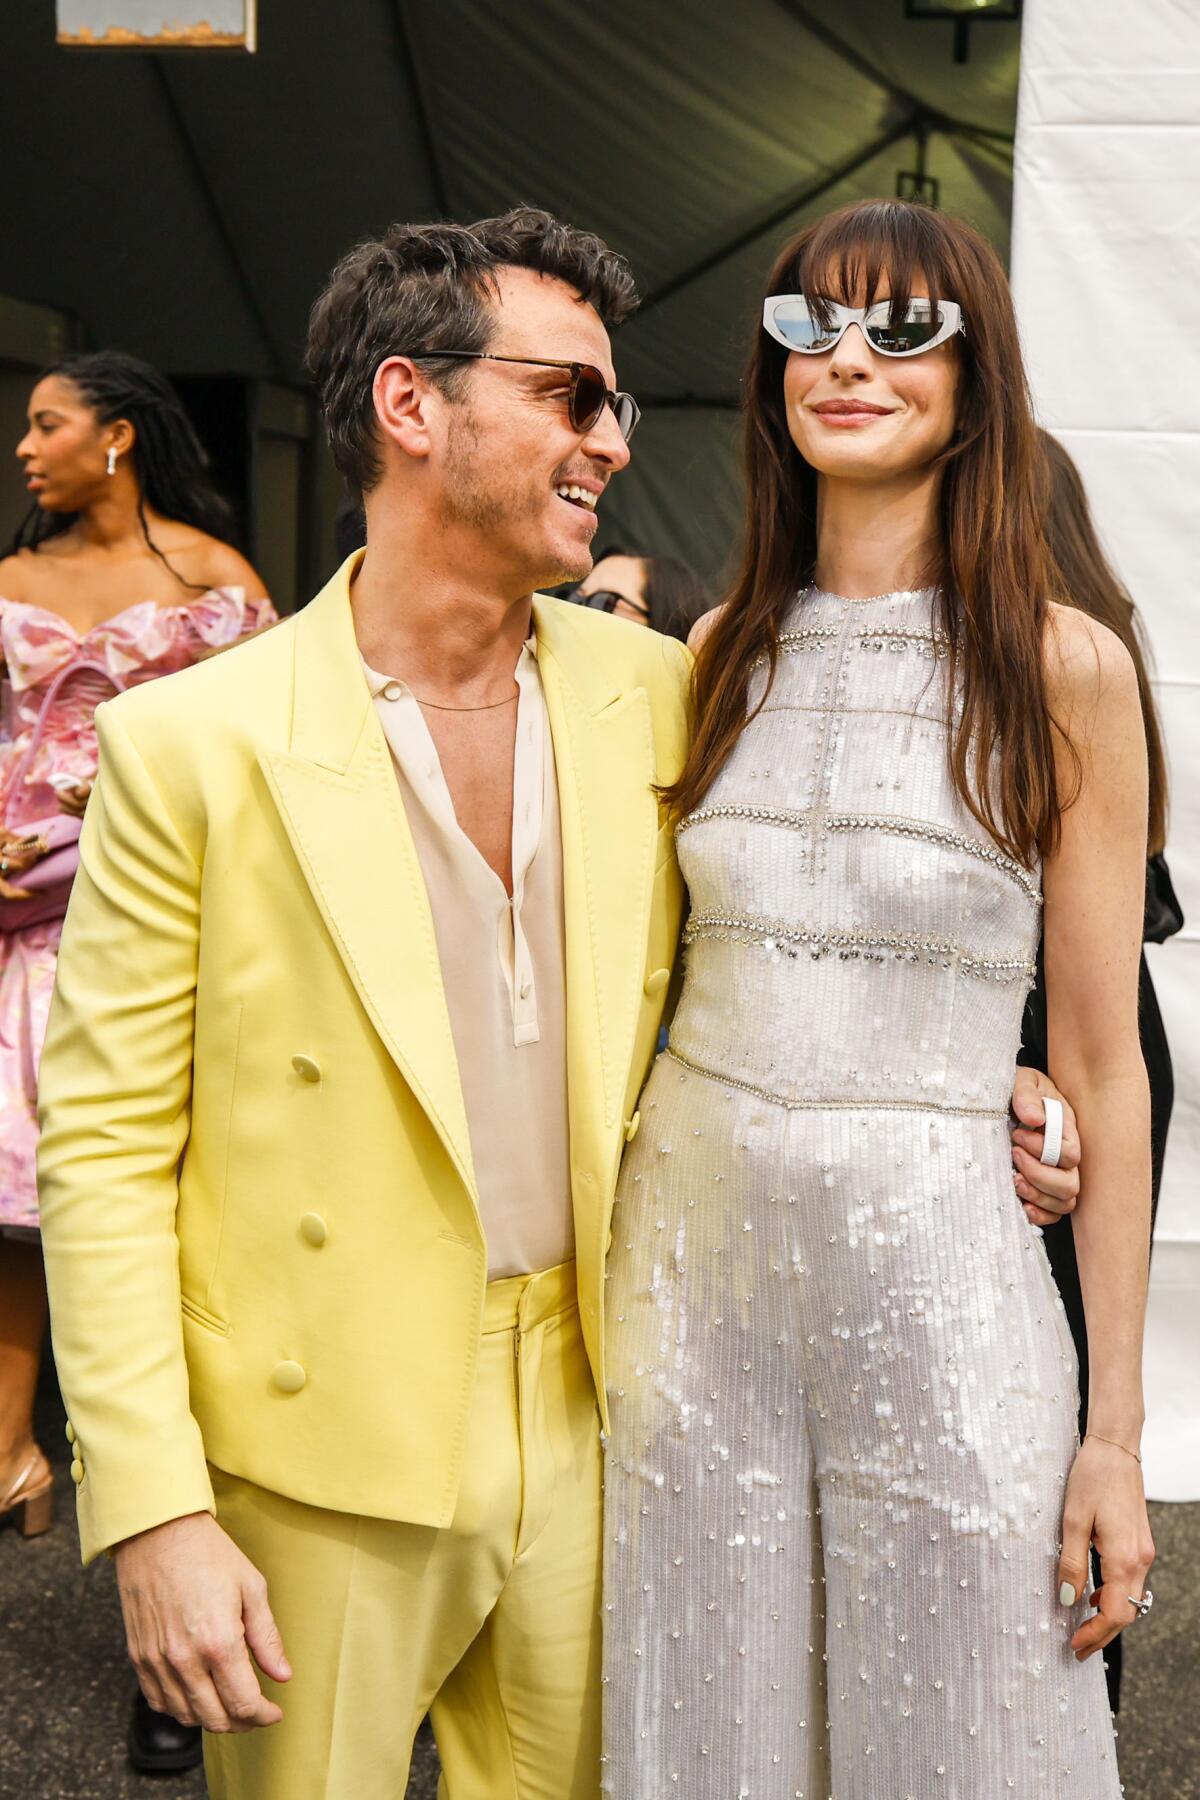 Andrew Scott, in a yellow suit, smiles standing next to Anne Hathaway in a sparkly white jumpsuit